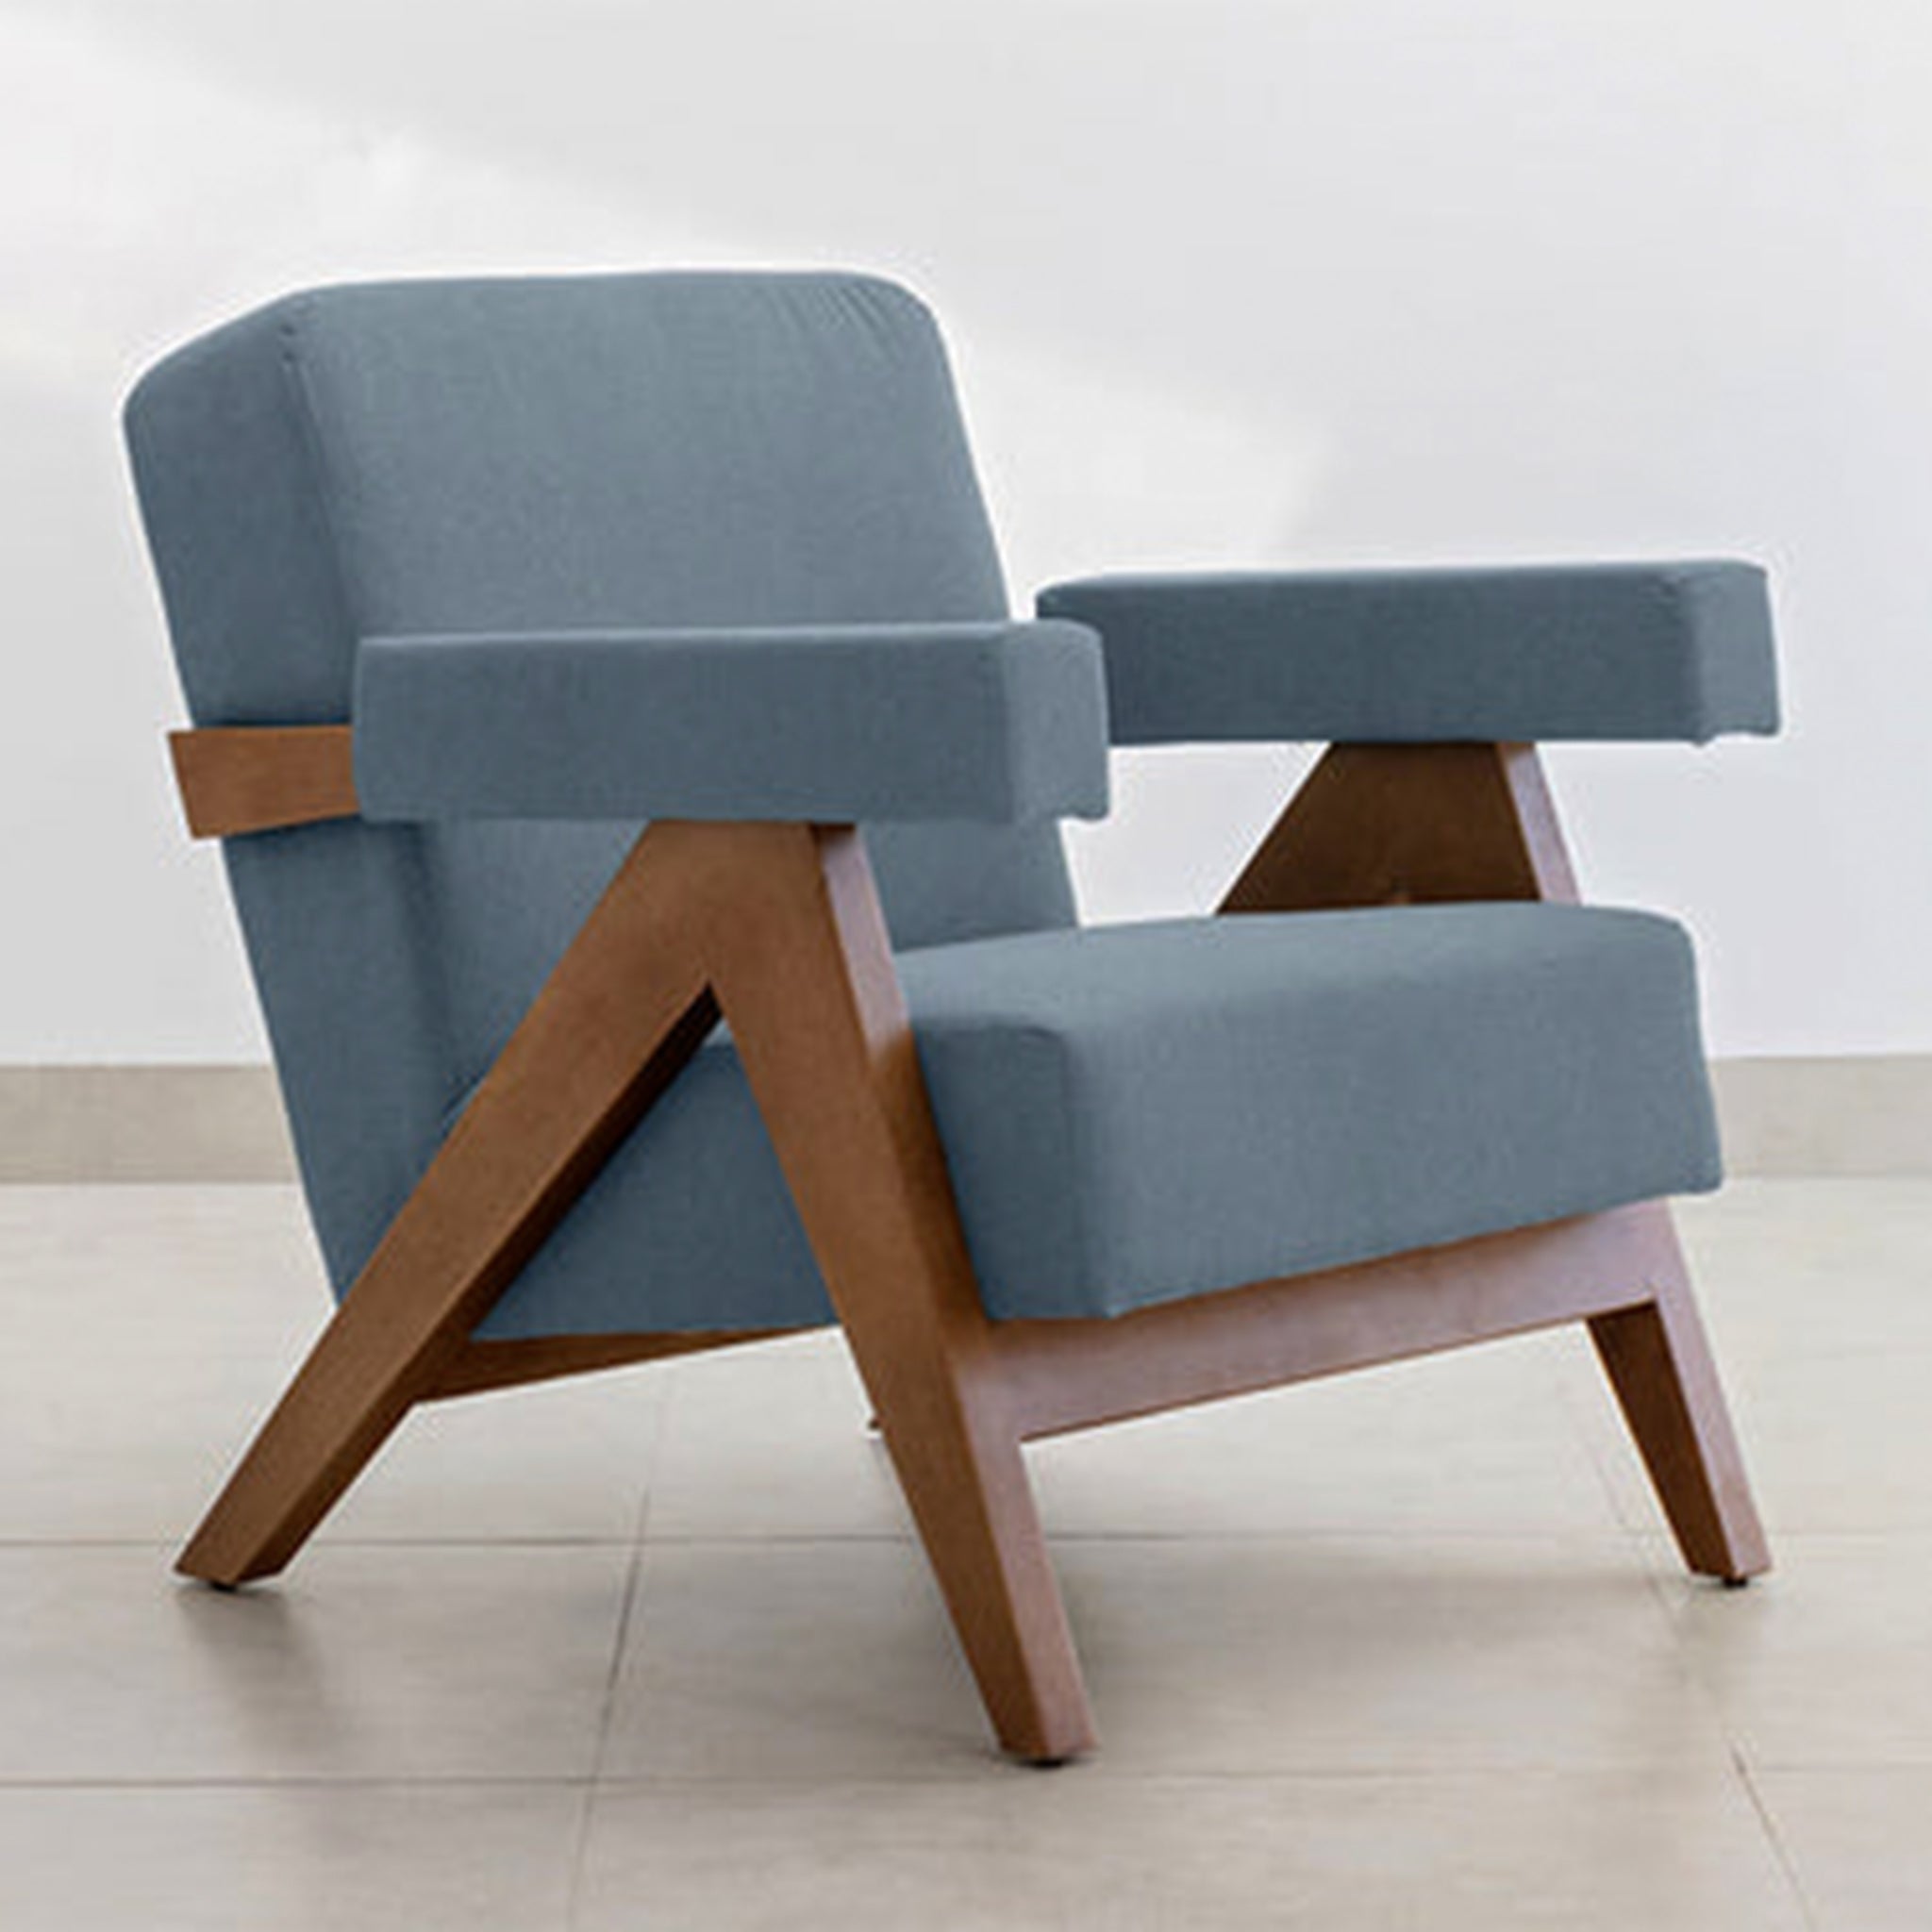 The Pierre Accent Chair featuring elegant teal fabric and a wooden frame.